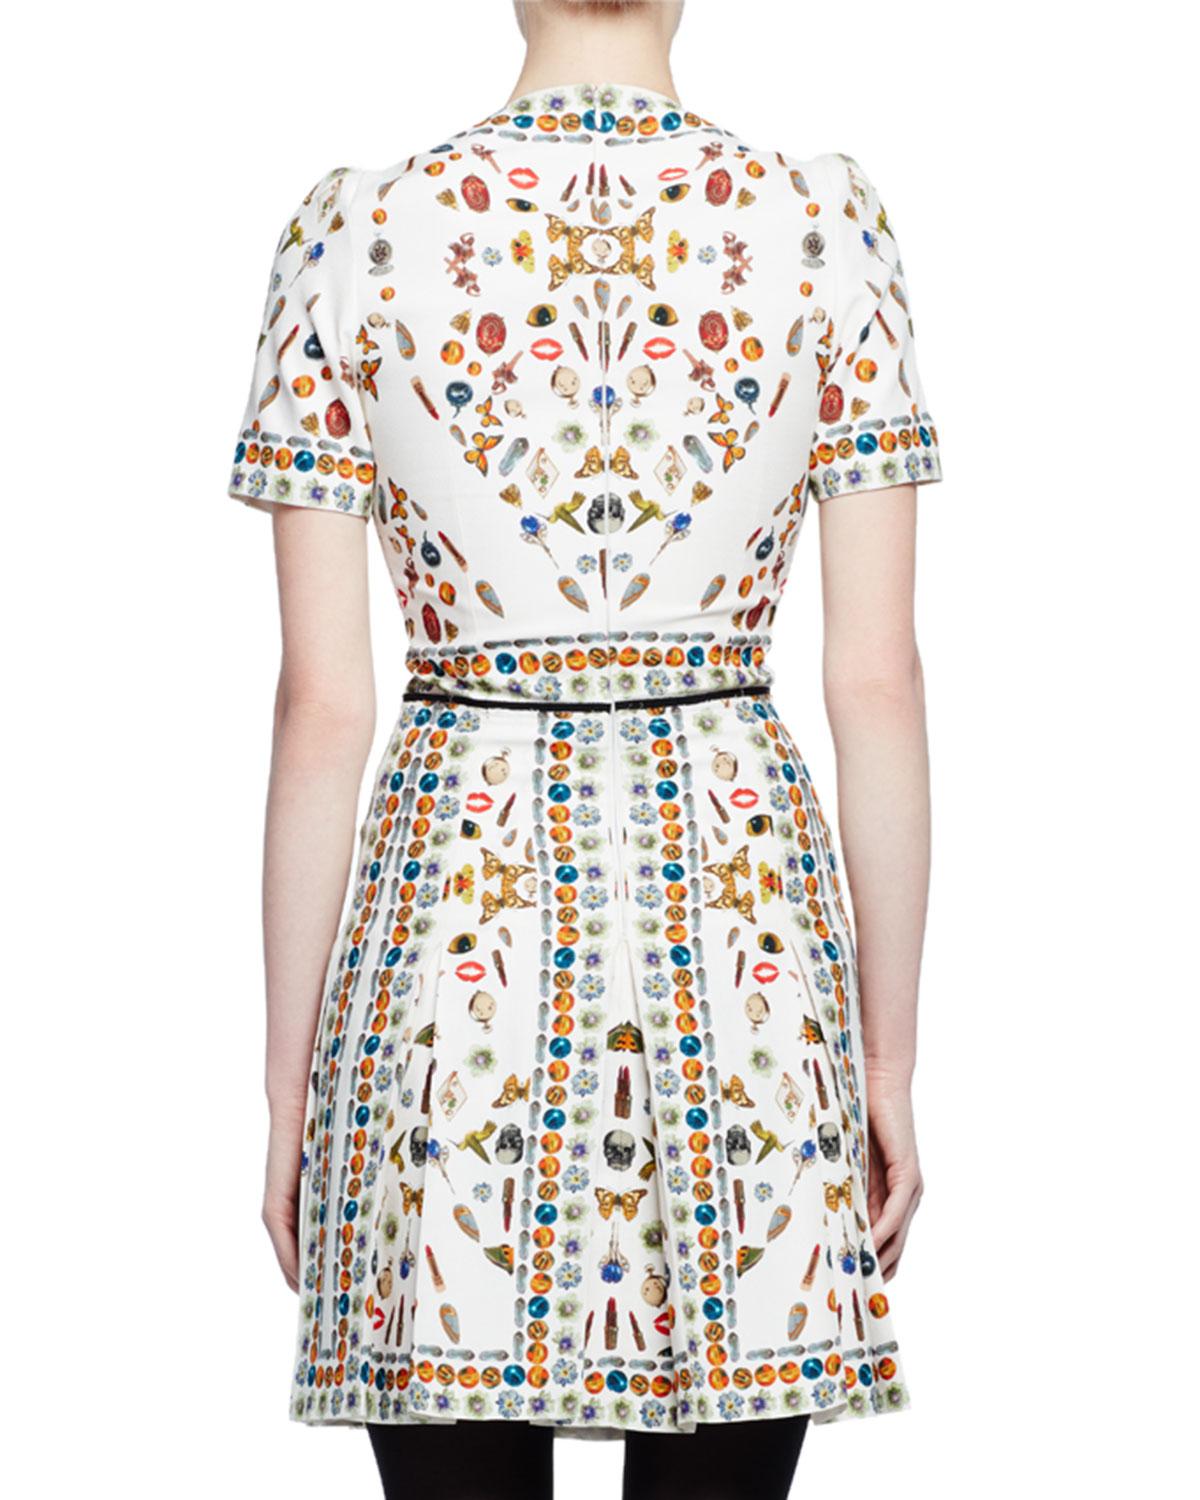 Alexander McQueen printed dress as seen on Kate Middleton

IT size 44 - US 8

New, with tags